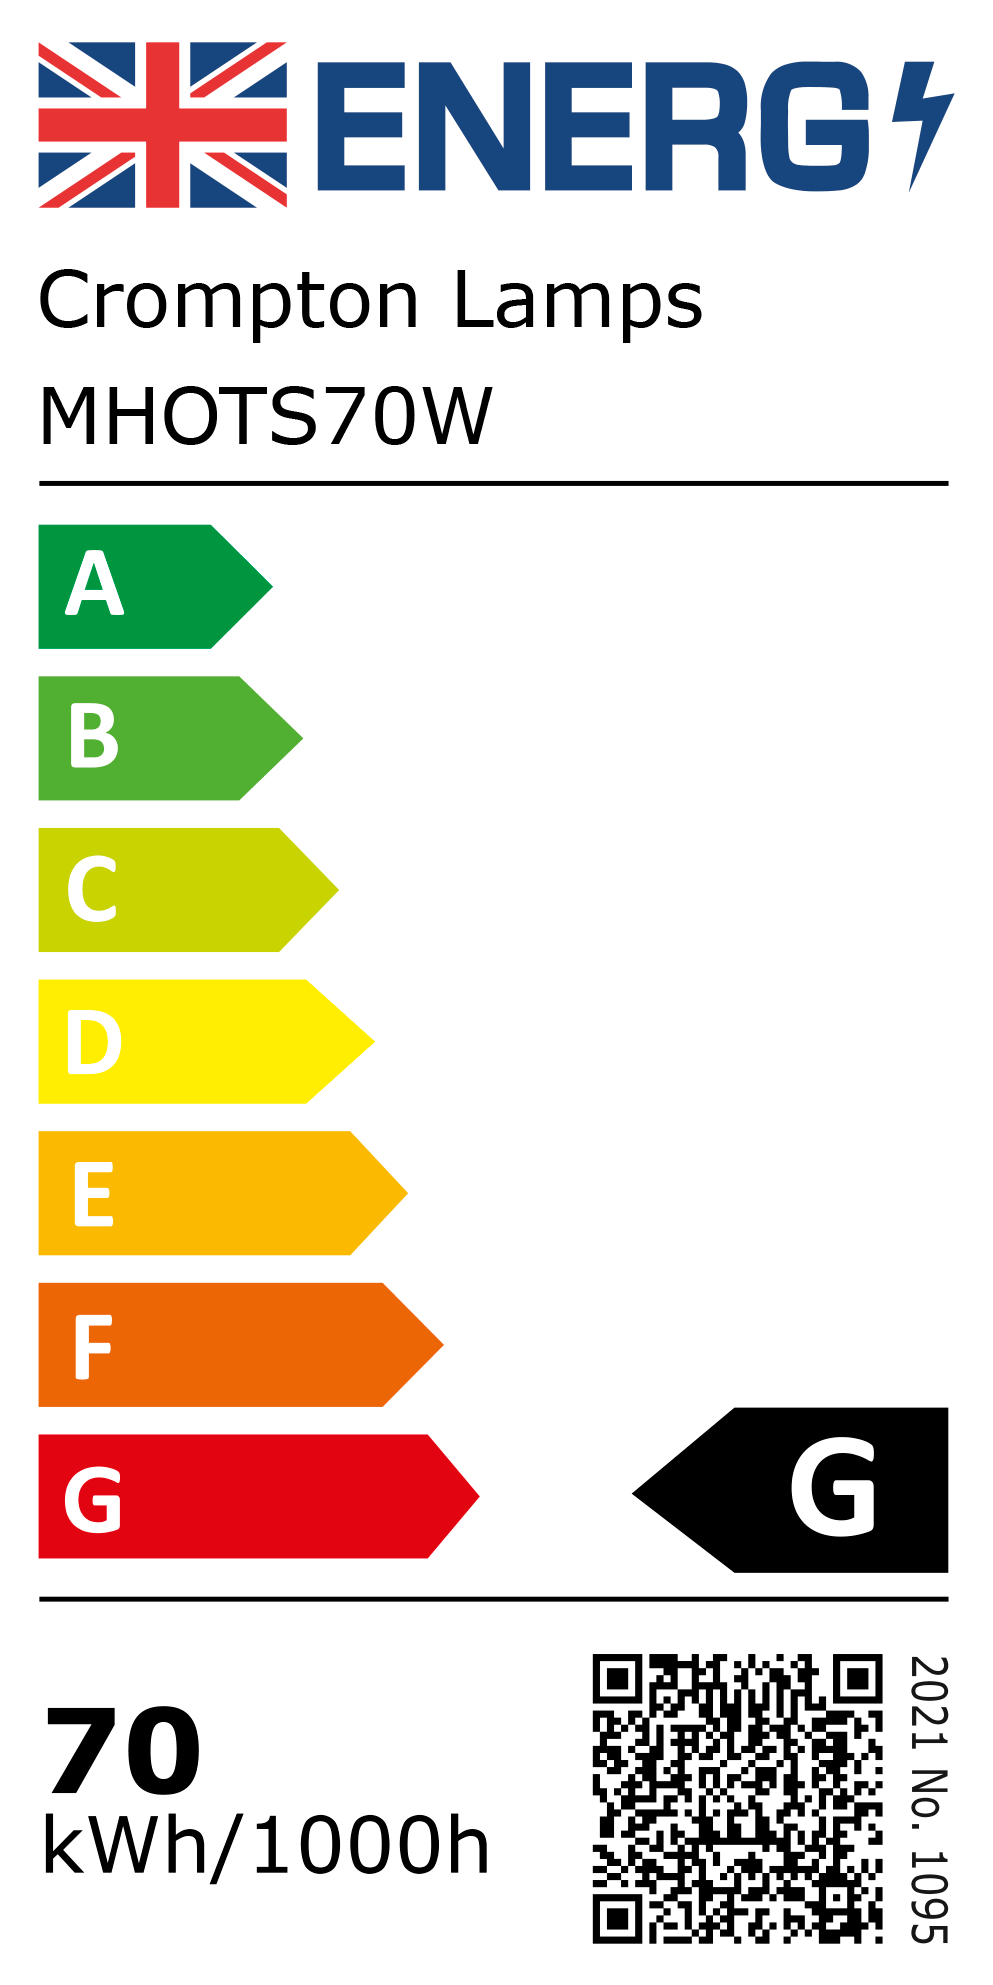 New 2021 Energy Rating Label: Stock Code MHOTS70W